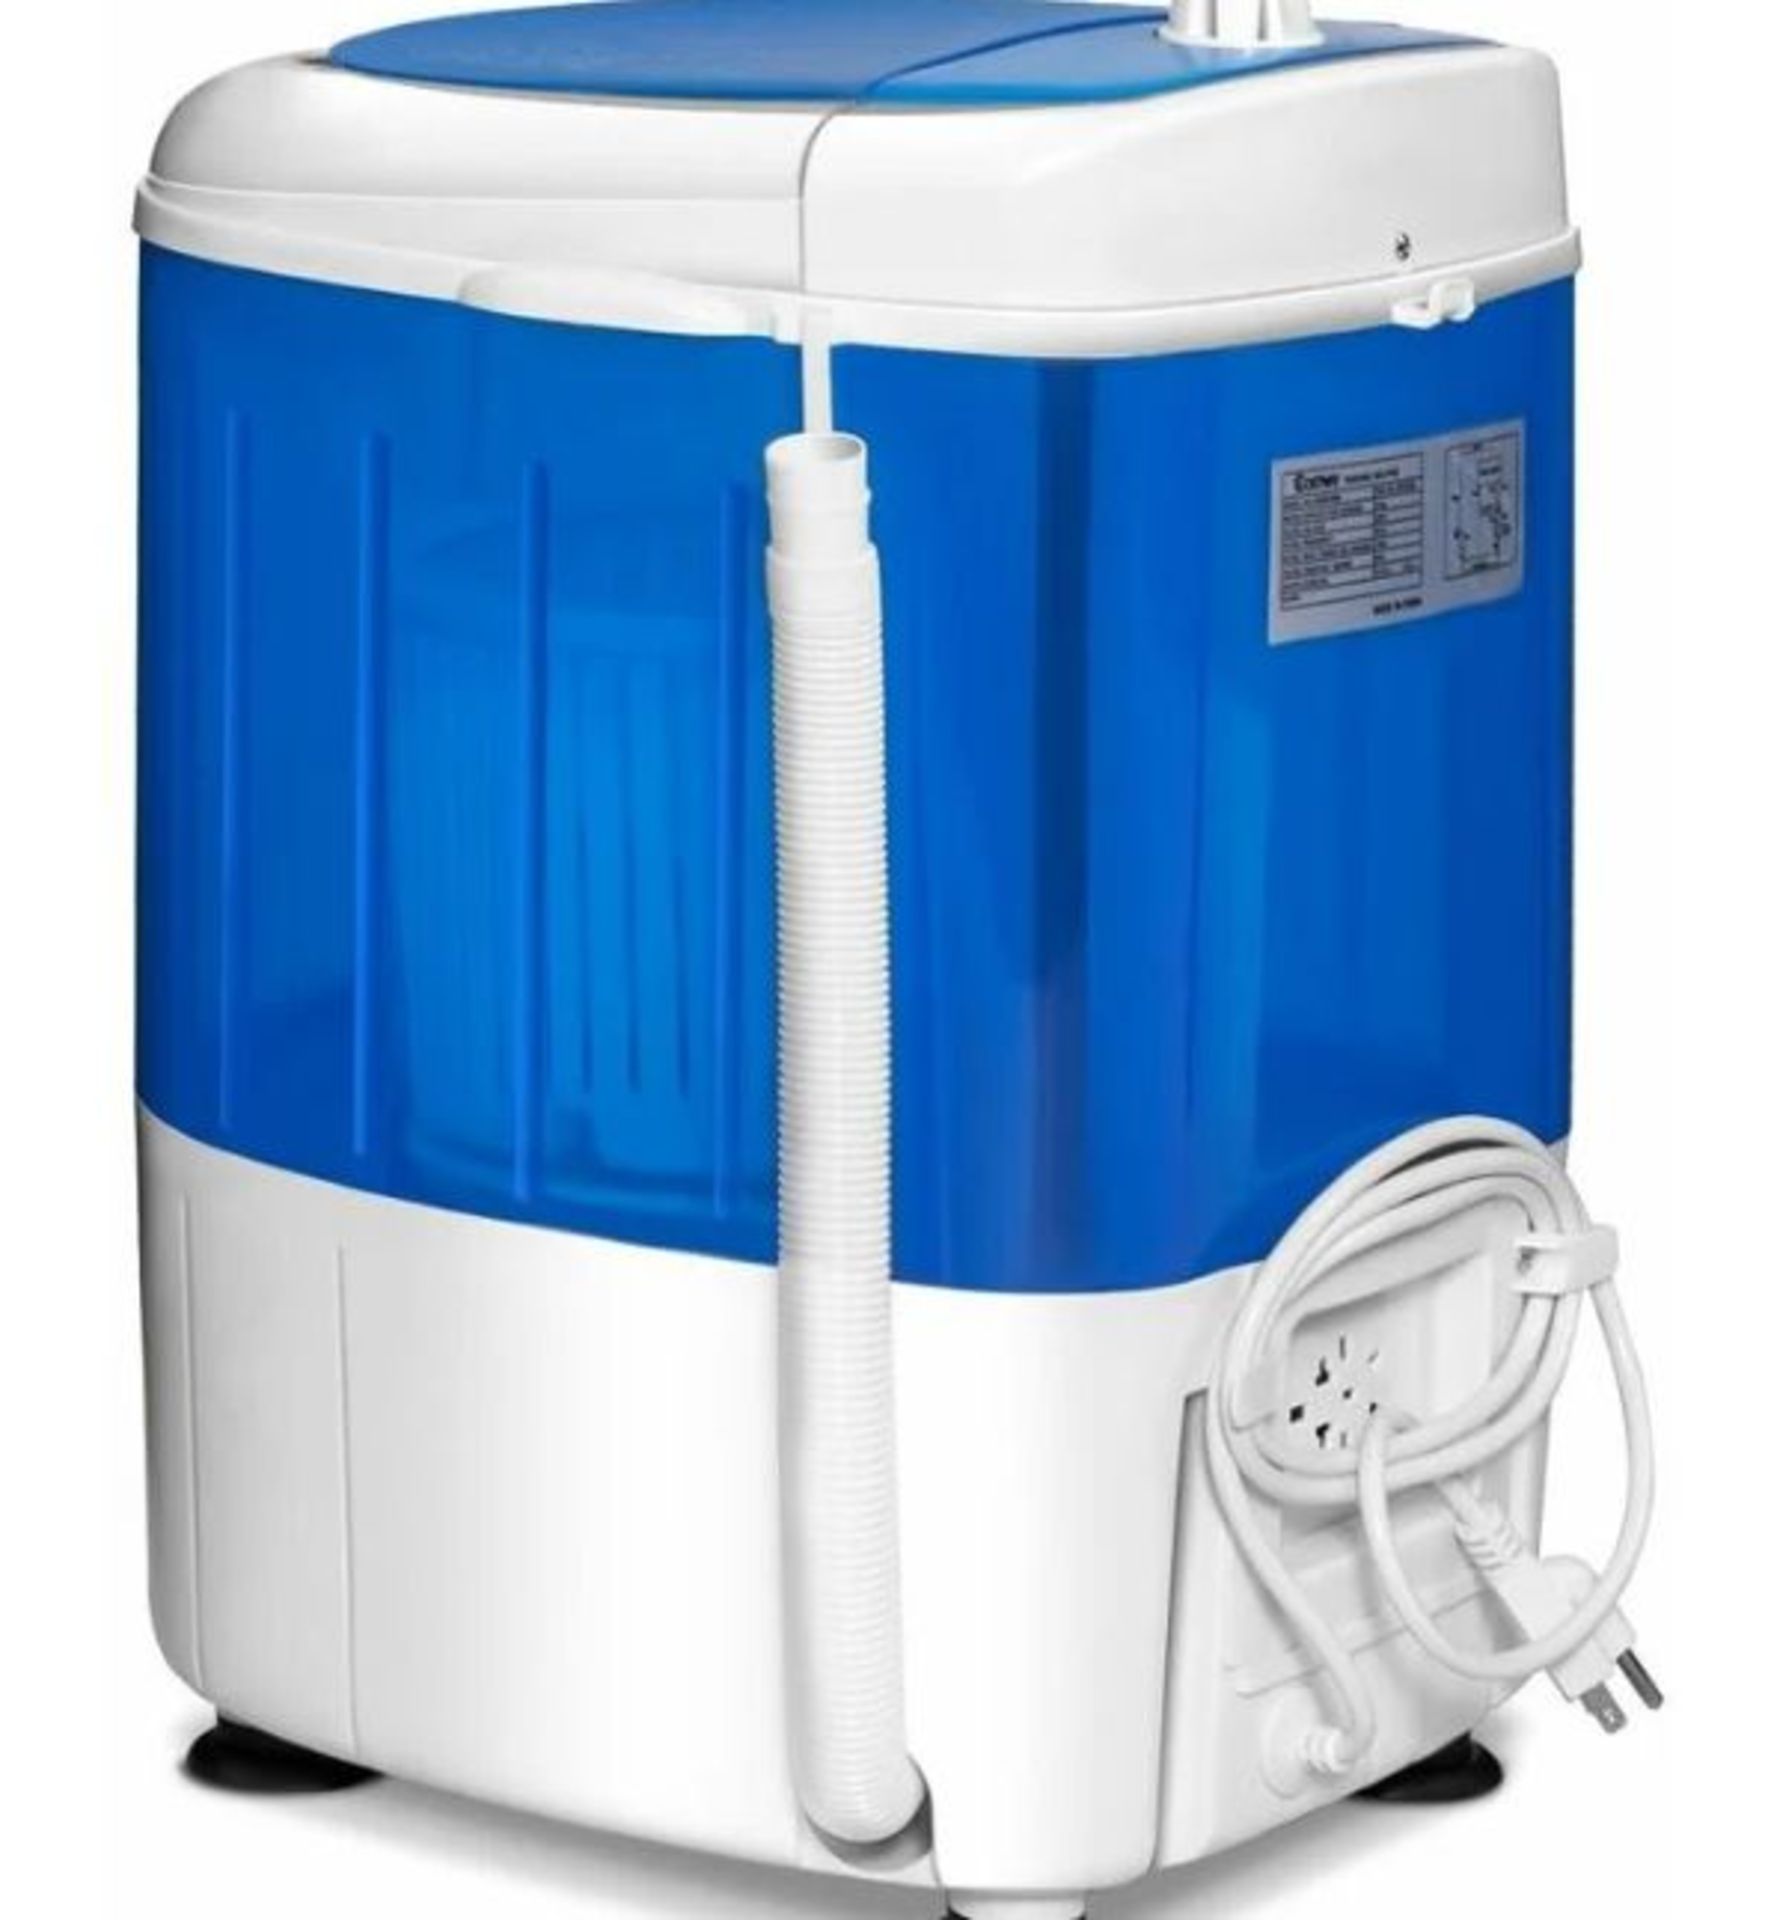 2-in-1 Mini Washing Machine Single Tub Washer and Spin Dryer W/ Timing Funtion. - ER53. Still